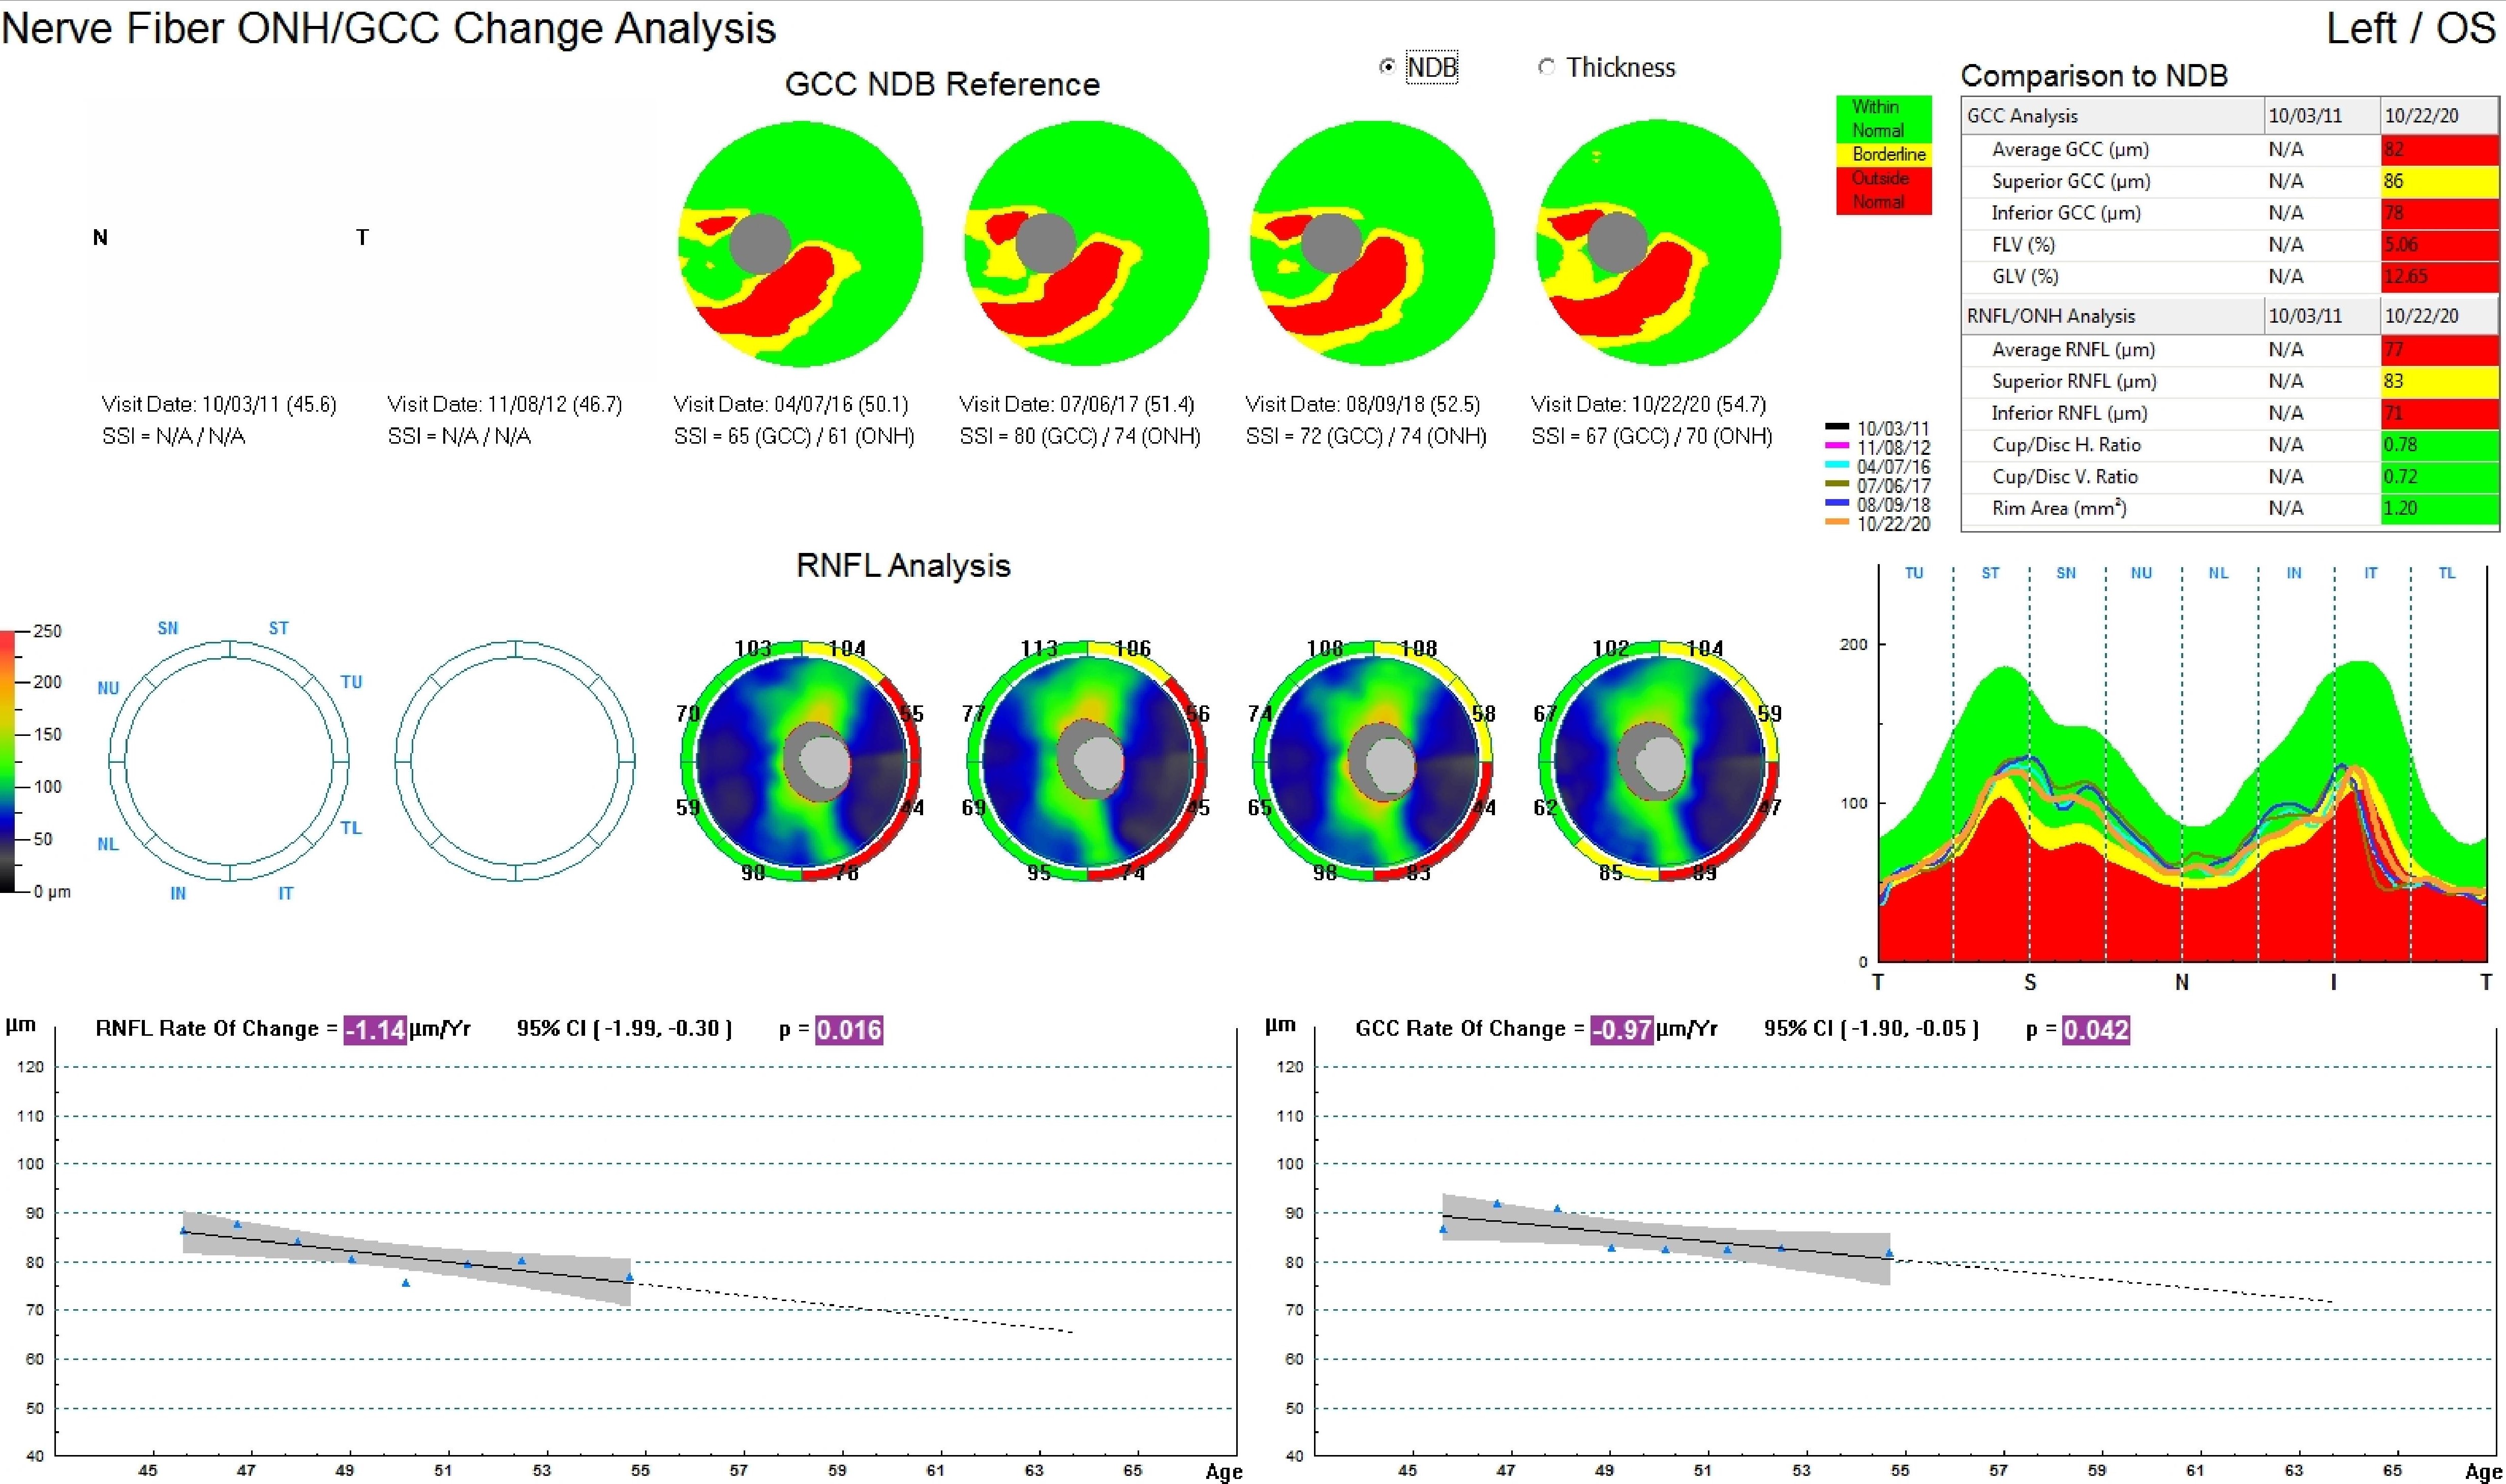 This image represents the change analysis over a nine year period of a male patient diagnosed with glaucomatocyclitic crisis in the left eye. Through this nine-year follow-up period his rate of GCC loss is -0.97microns/year and RNFL is -1.14microns/year . Both GCC and RNFL appear to have significant rates of loss as shown by their P values. 